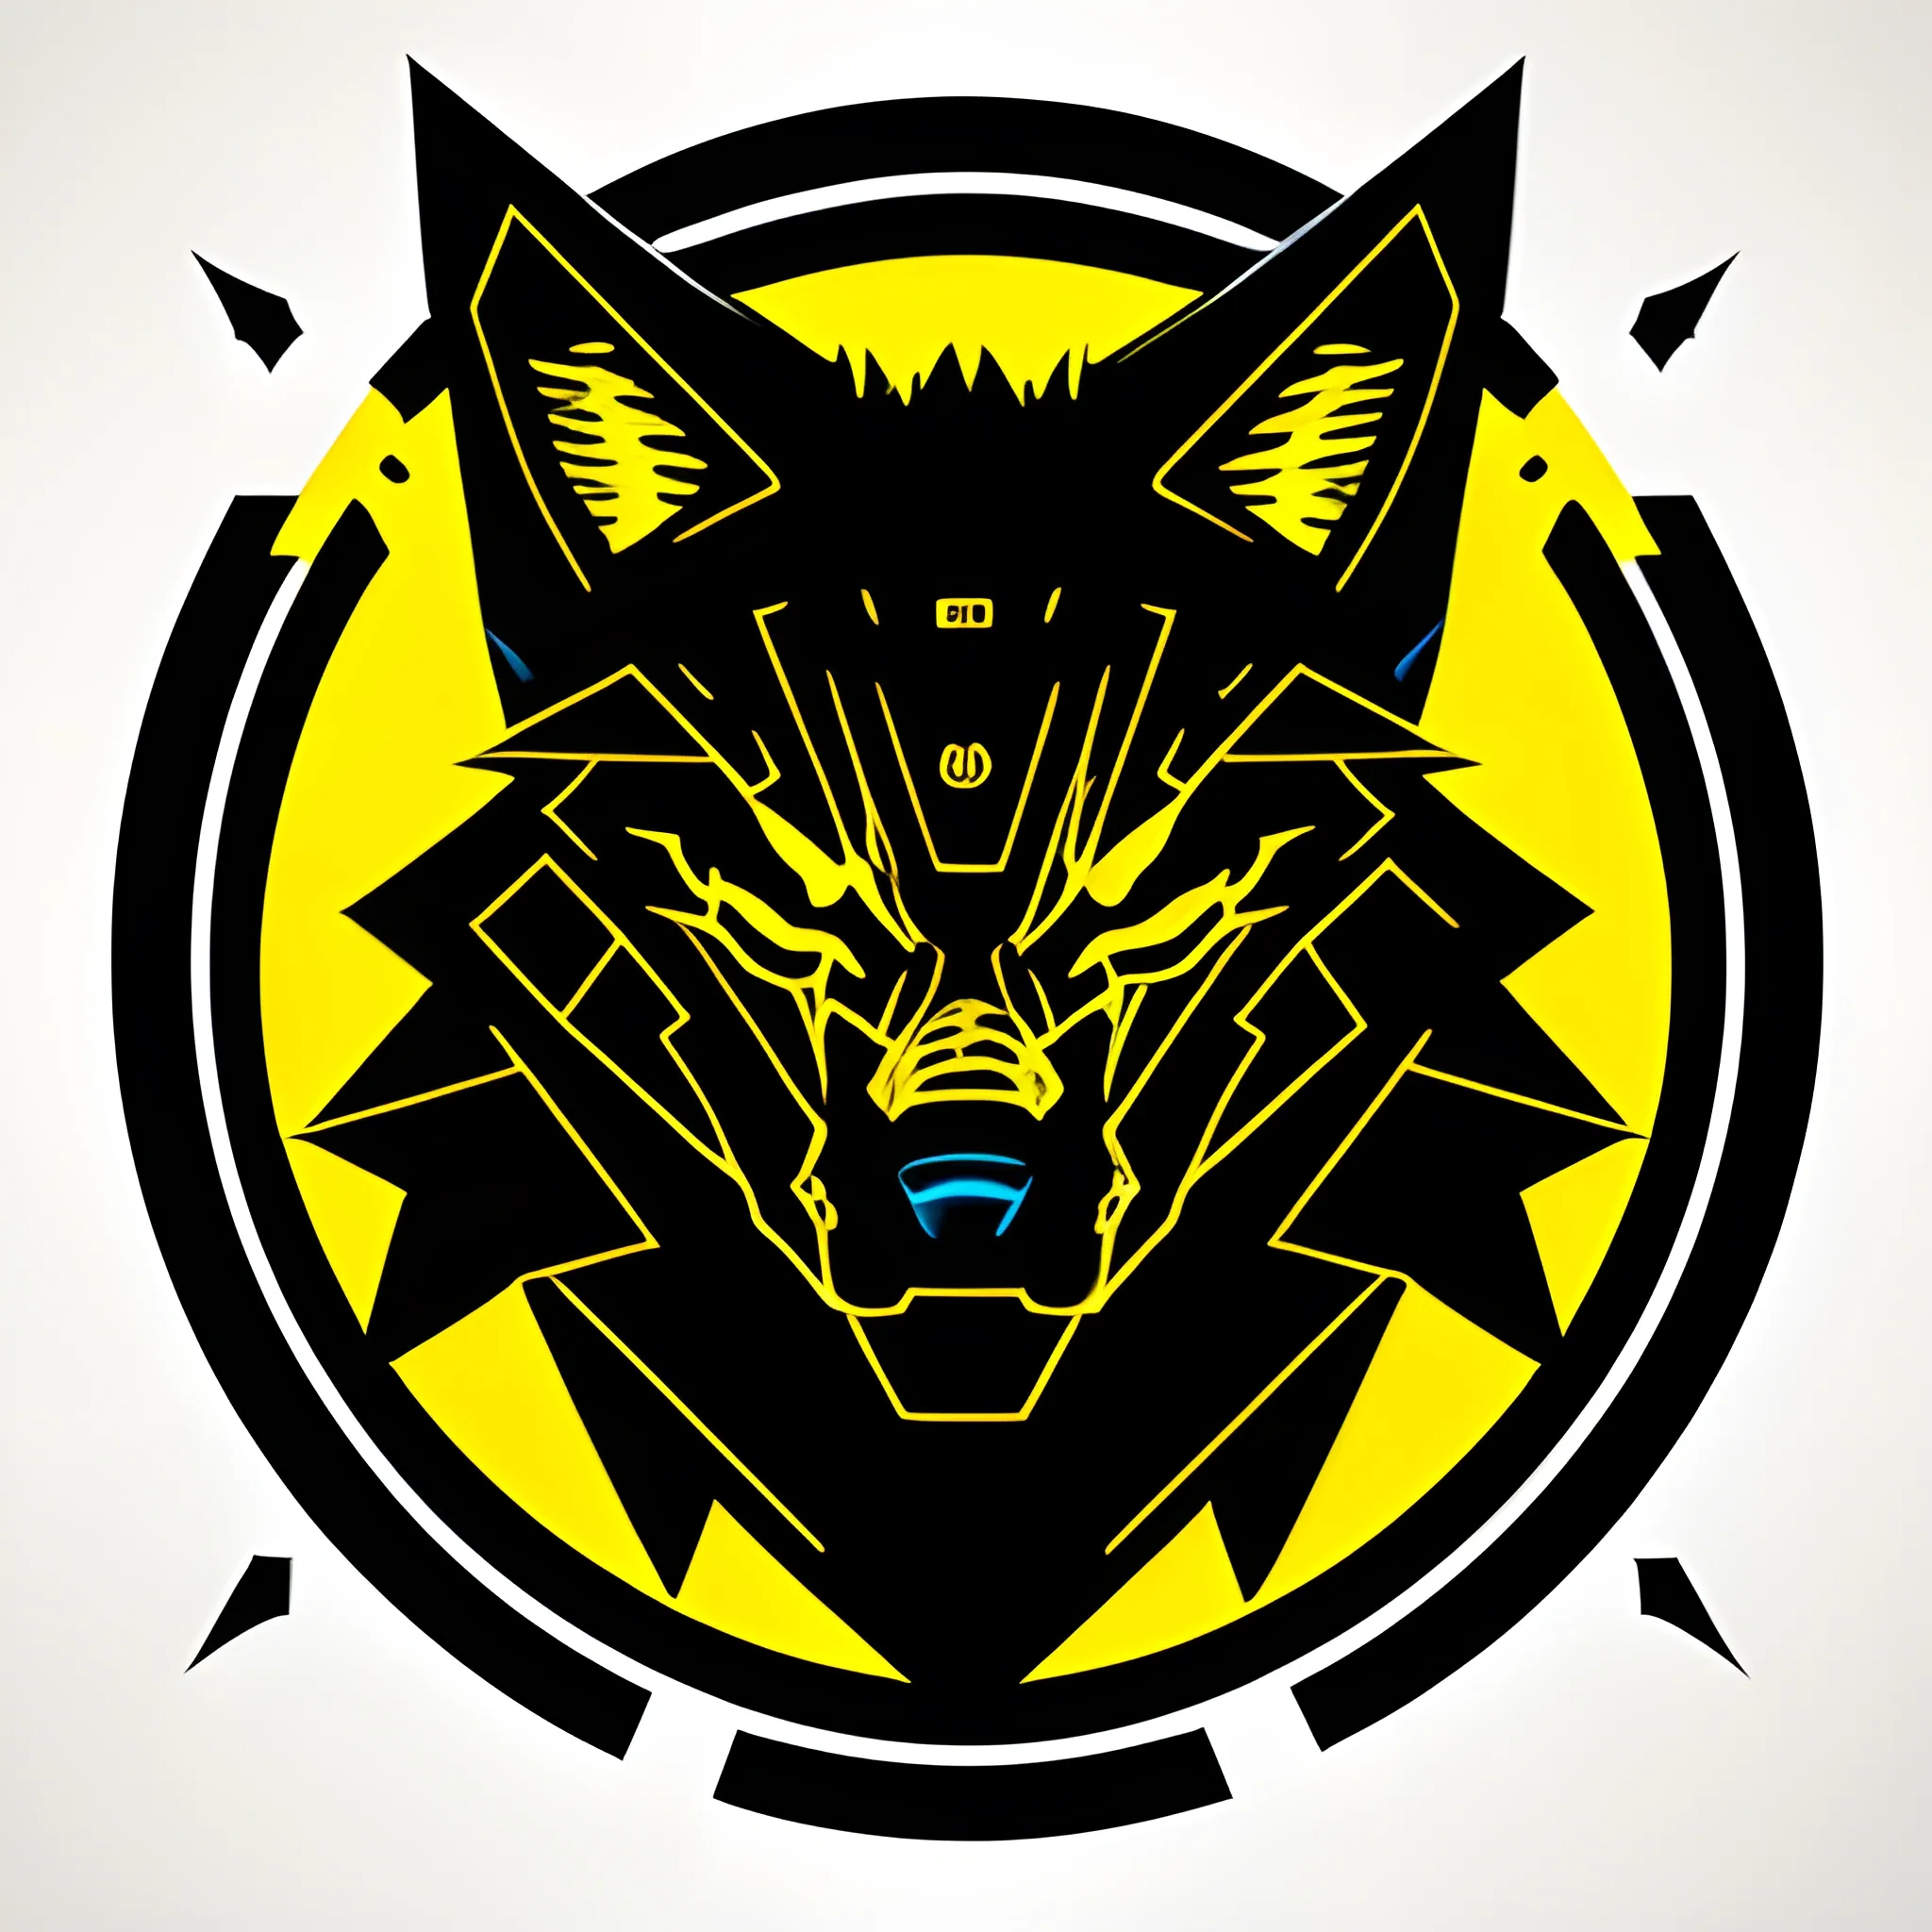 An angry cyberpunk wolf VECTOR logo, using GOLDEN yellow AND GRAY PALLETTE color.